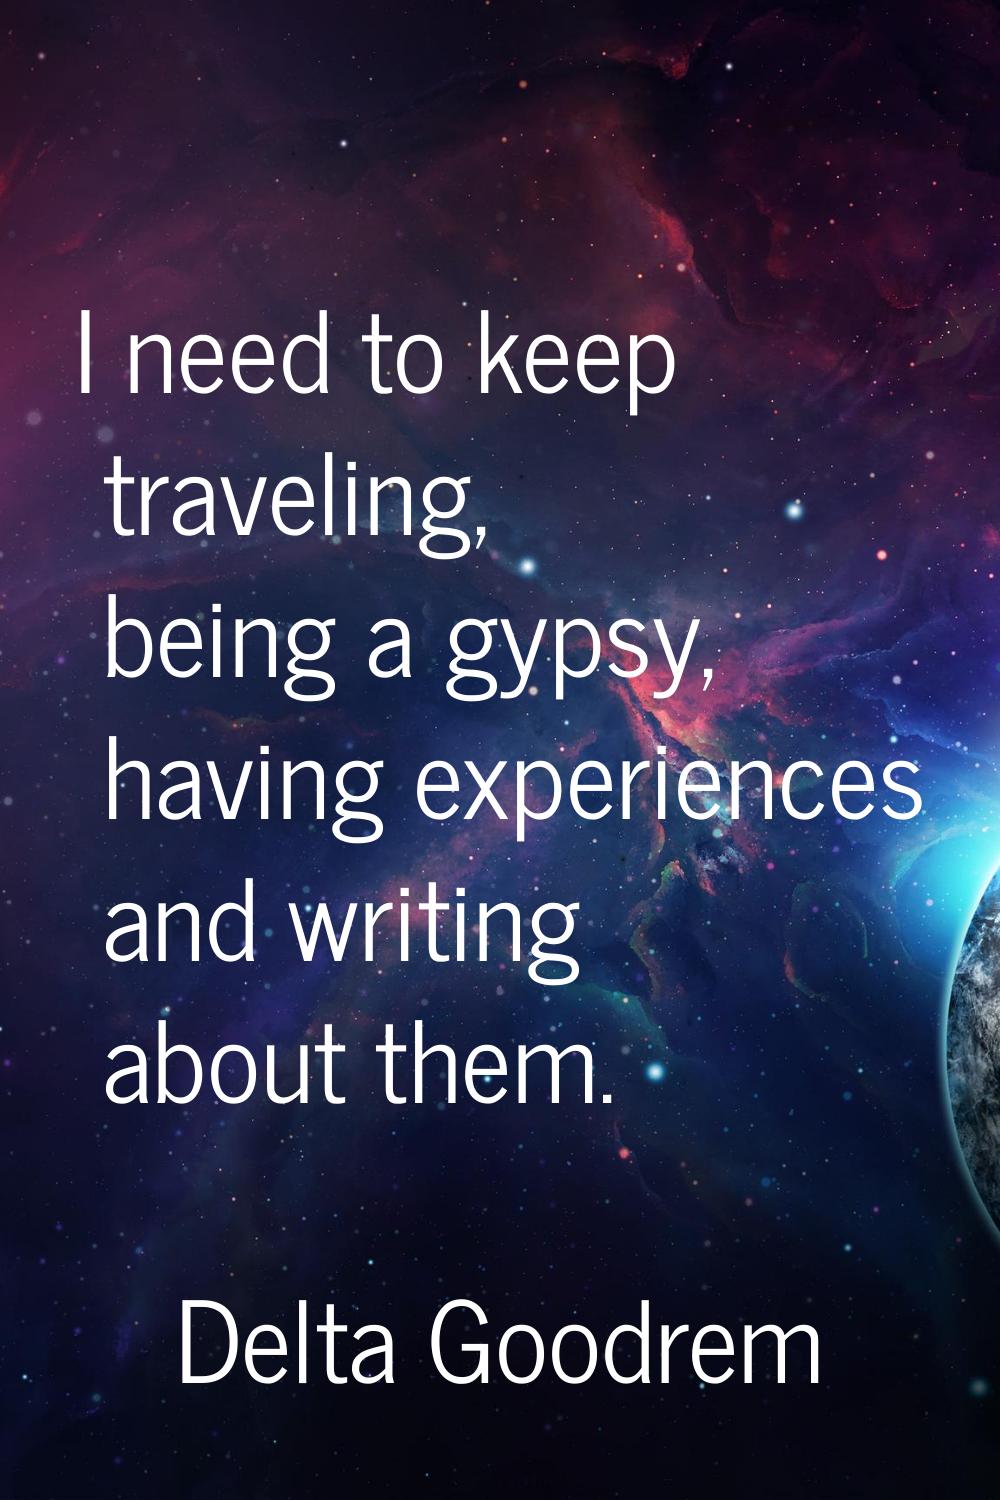 I need to keep traveling, being a gypsy, having experiences and writing about them.